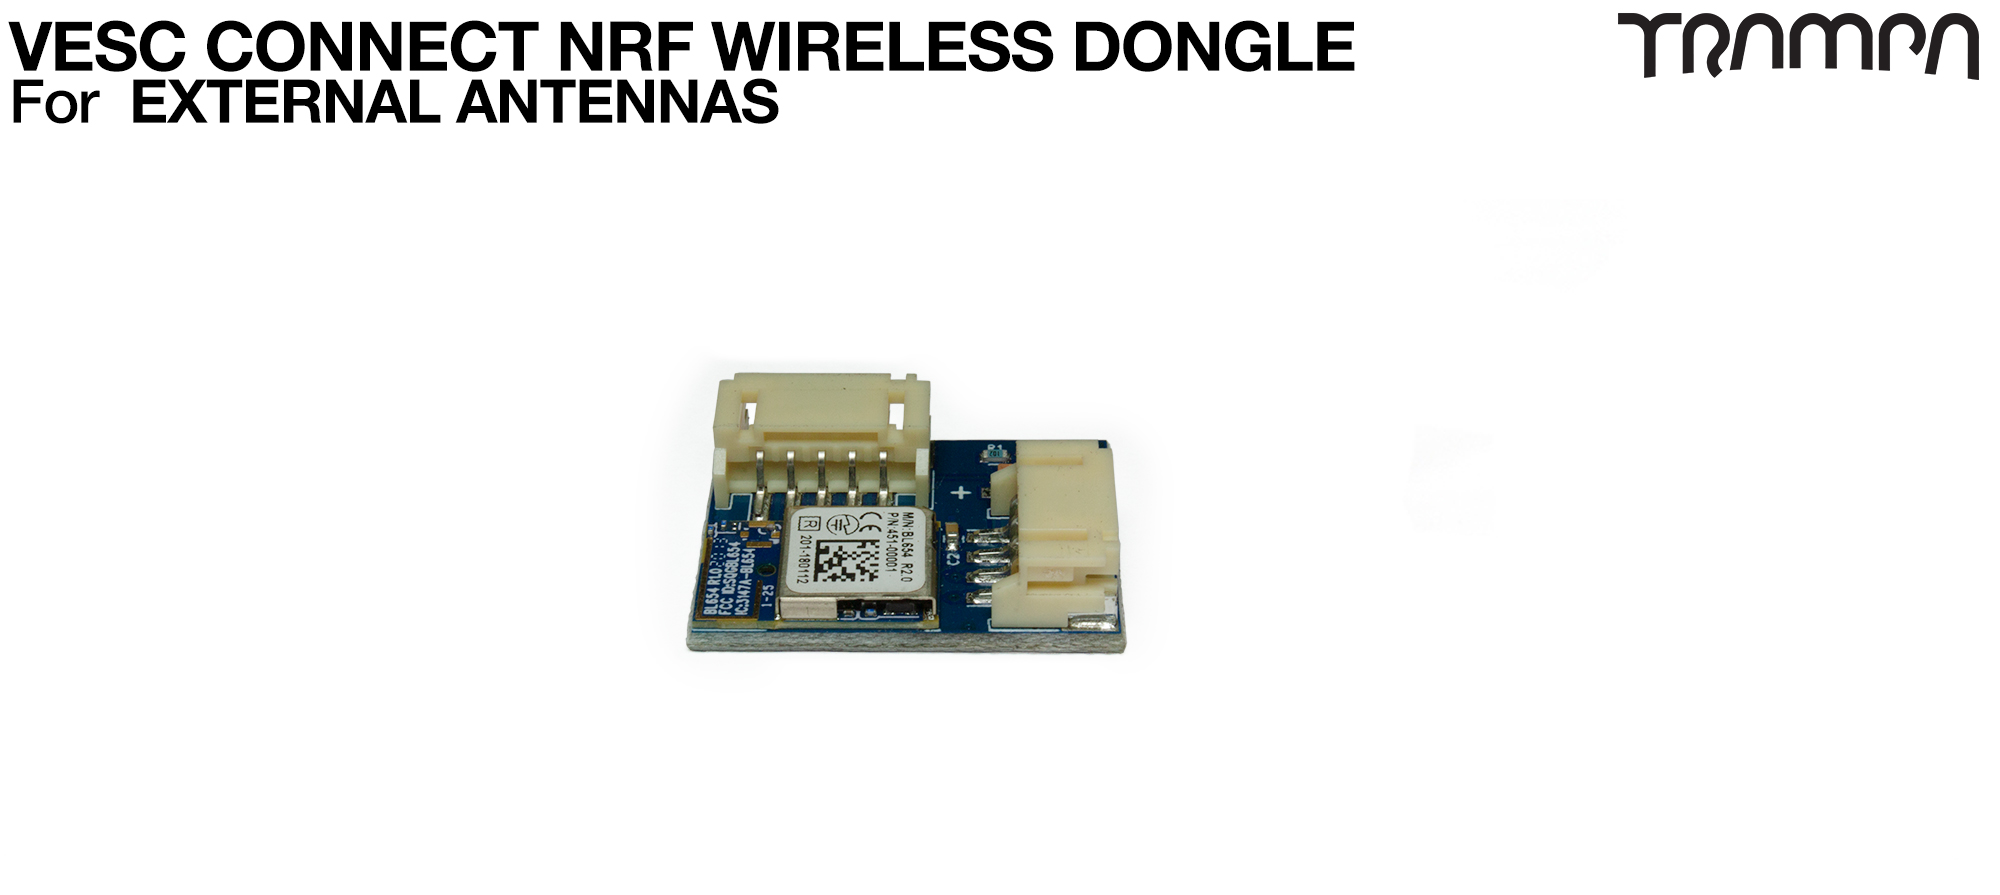 VESC Connect NRF Dongle with EXTERNAL DIPOLE Antenna (+£35)